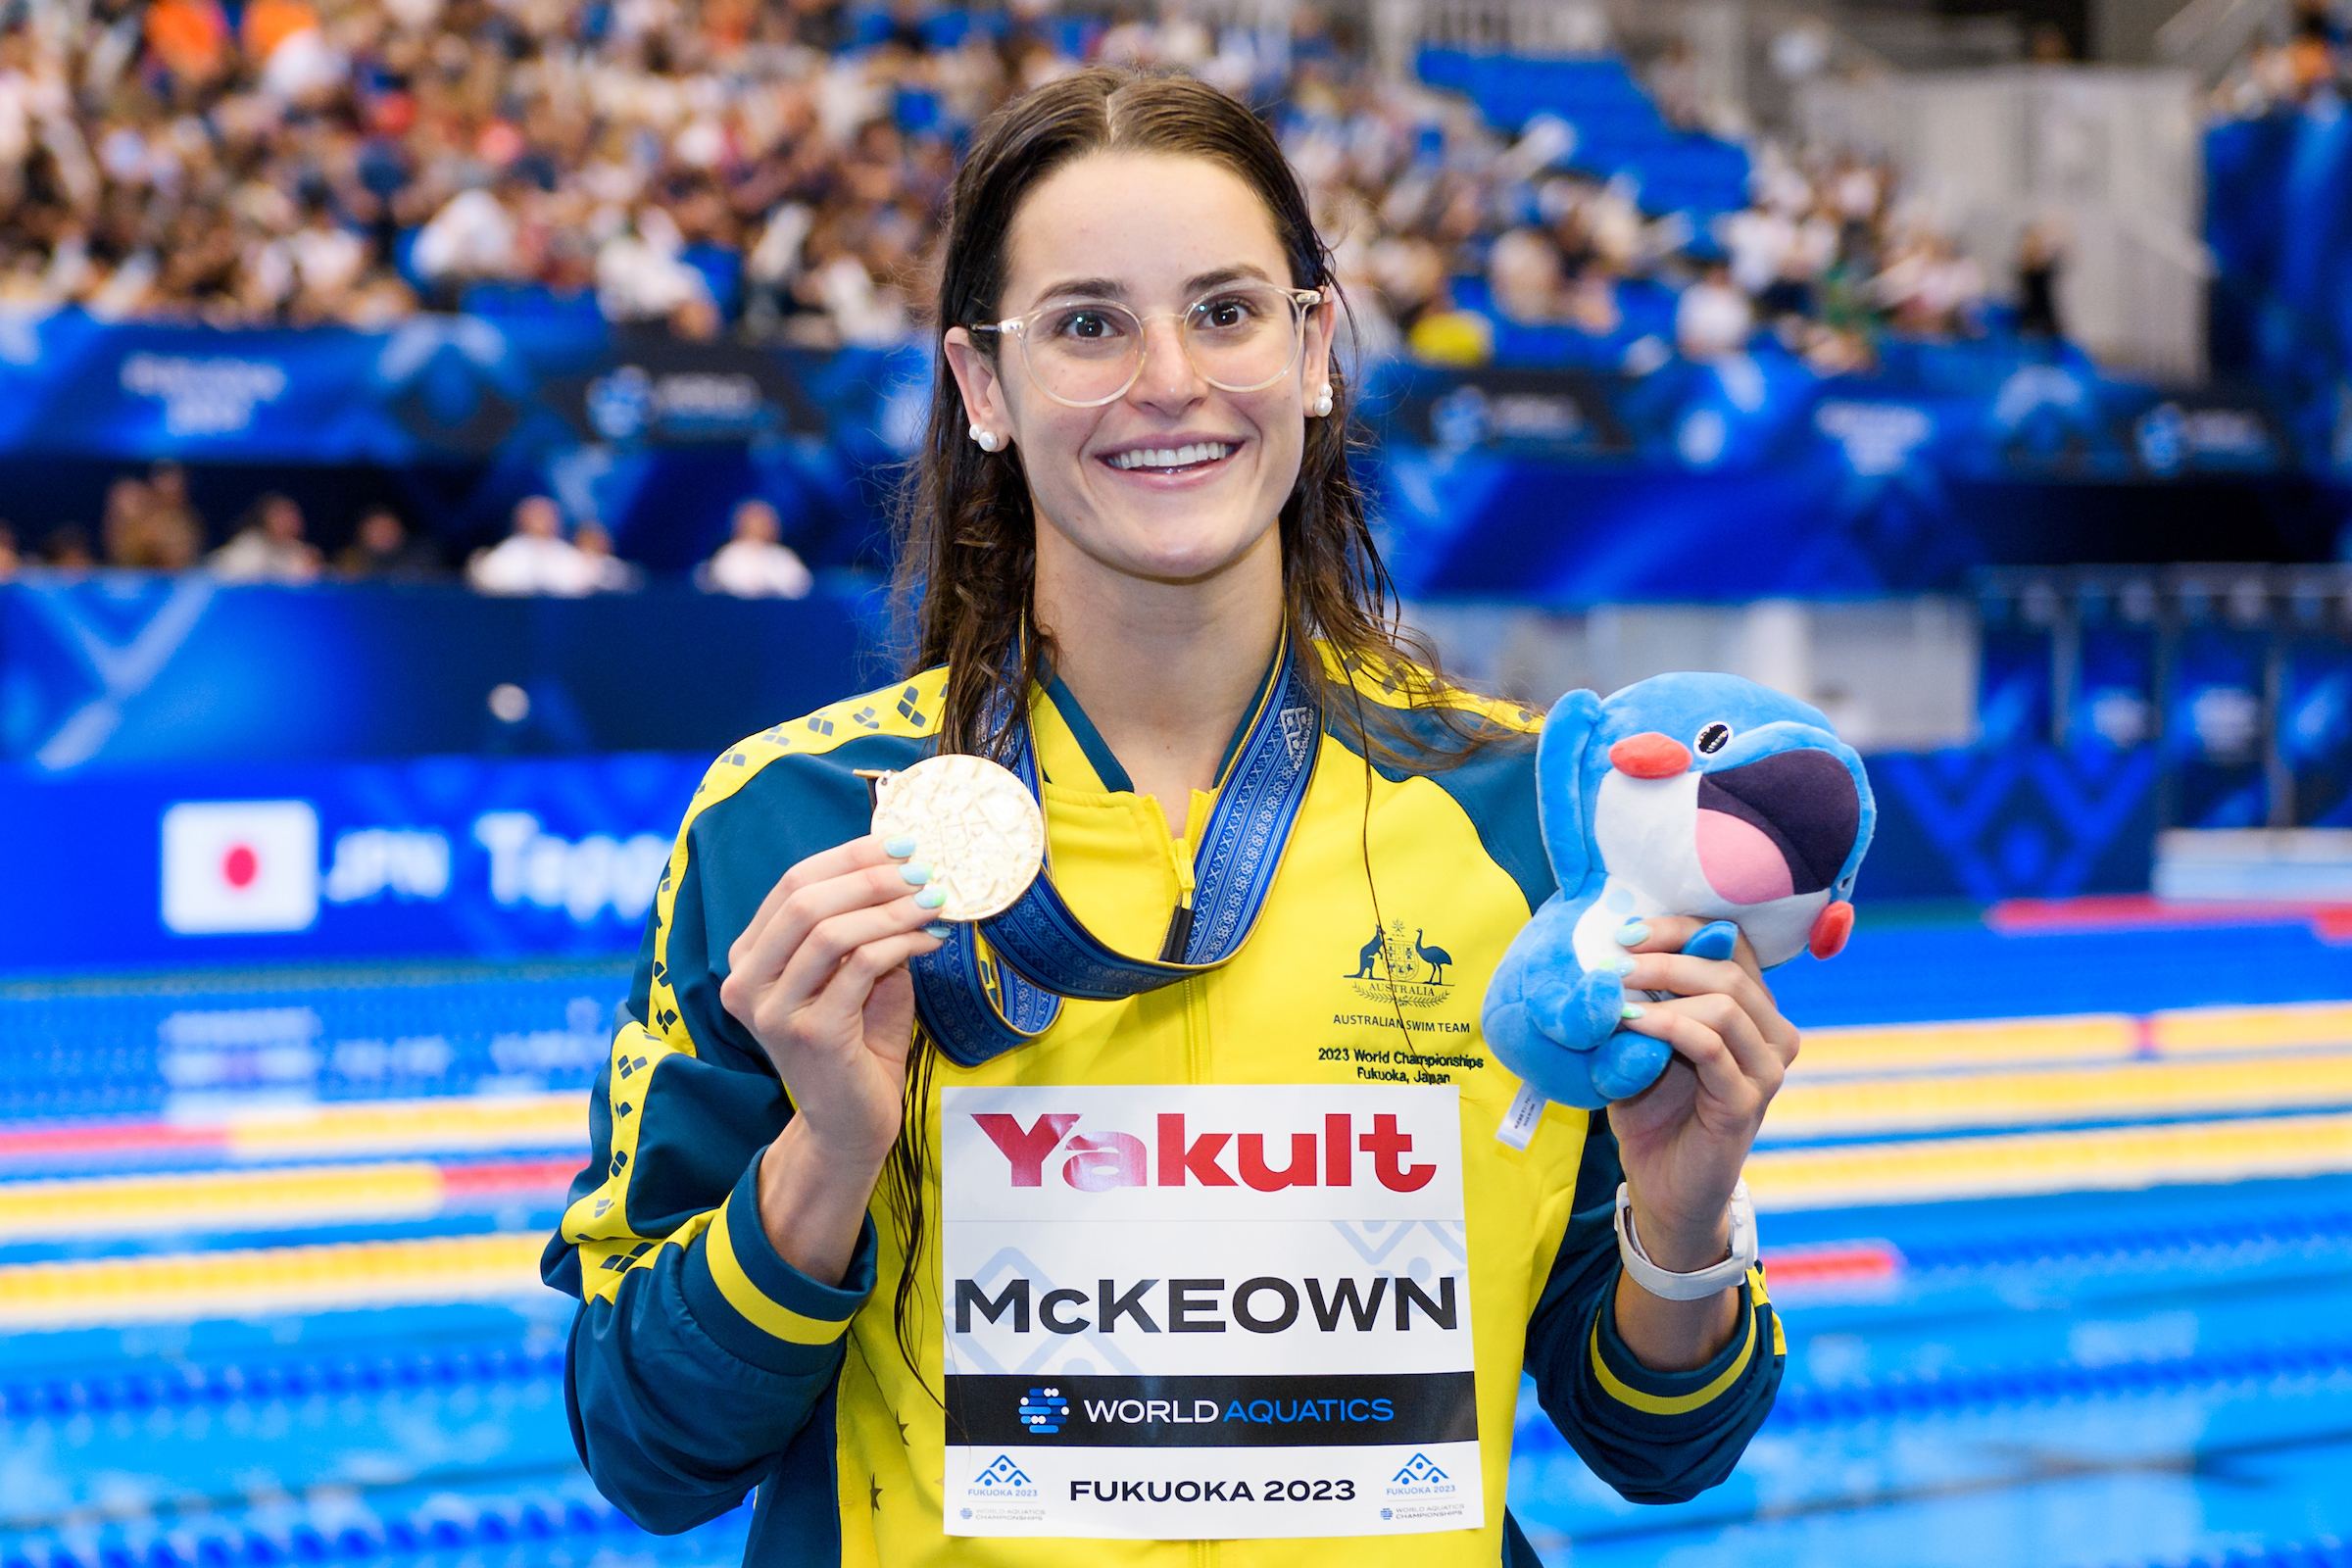 Kaylee Mckeown of Australia shows the gold medal after competing in the 100m Backstroke Women Final during the 20th World Aquatics Championships at the Marine Messe Hall A in Fukuoka (Japan), July 25th, 2023.